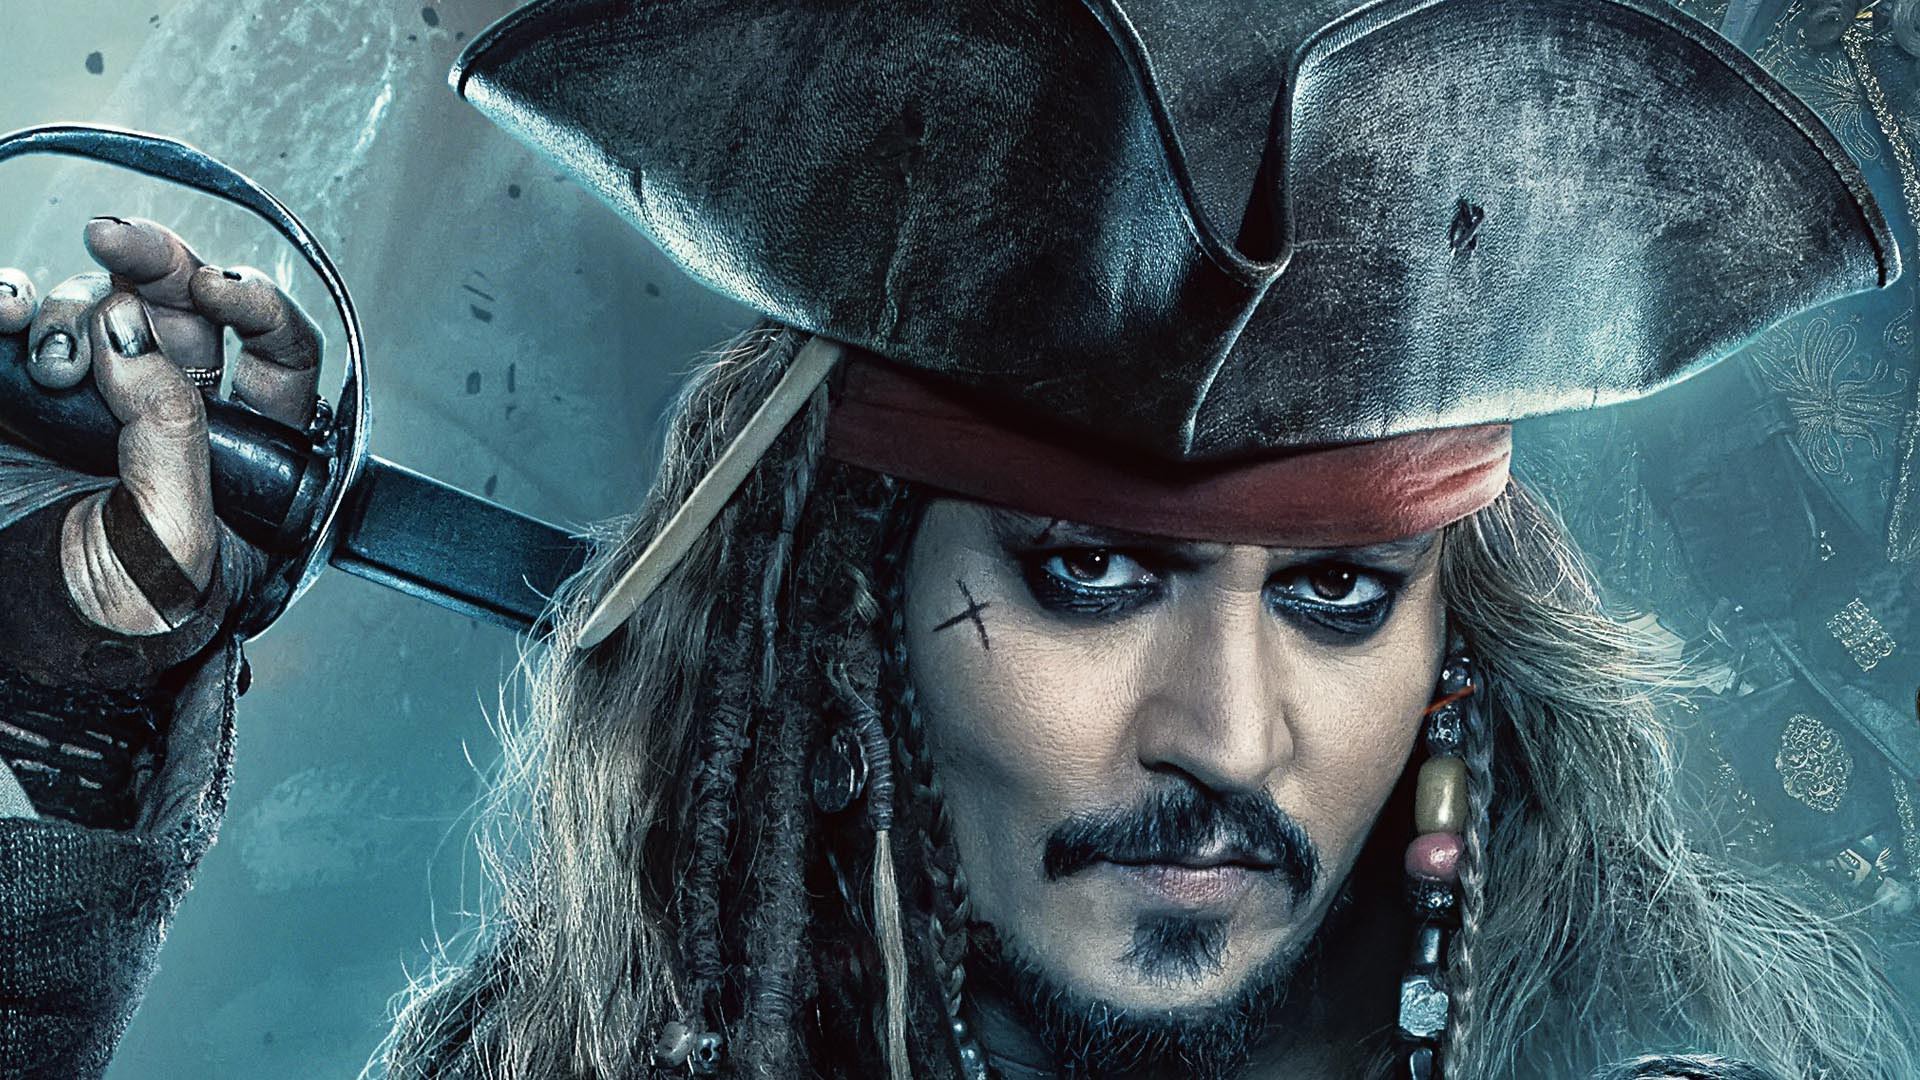 Rumored: Will Captain Jack Sparrow Appear in Future ‘Pirates of the Caribbean’ Movies?